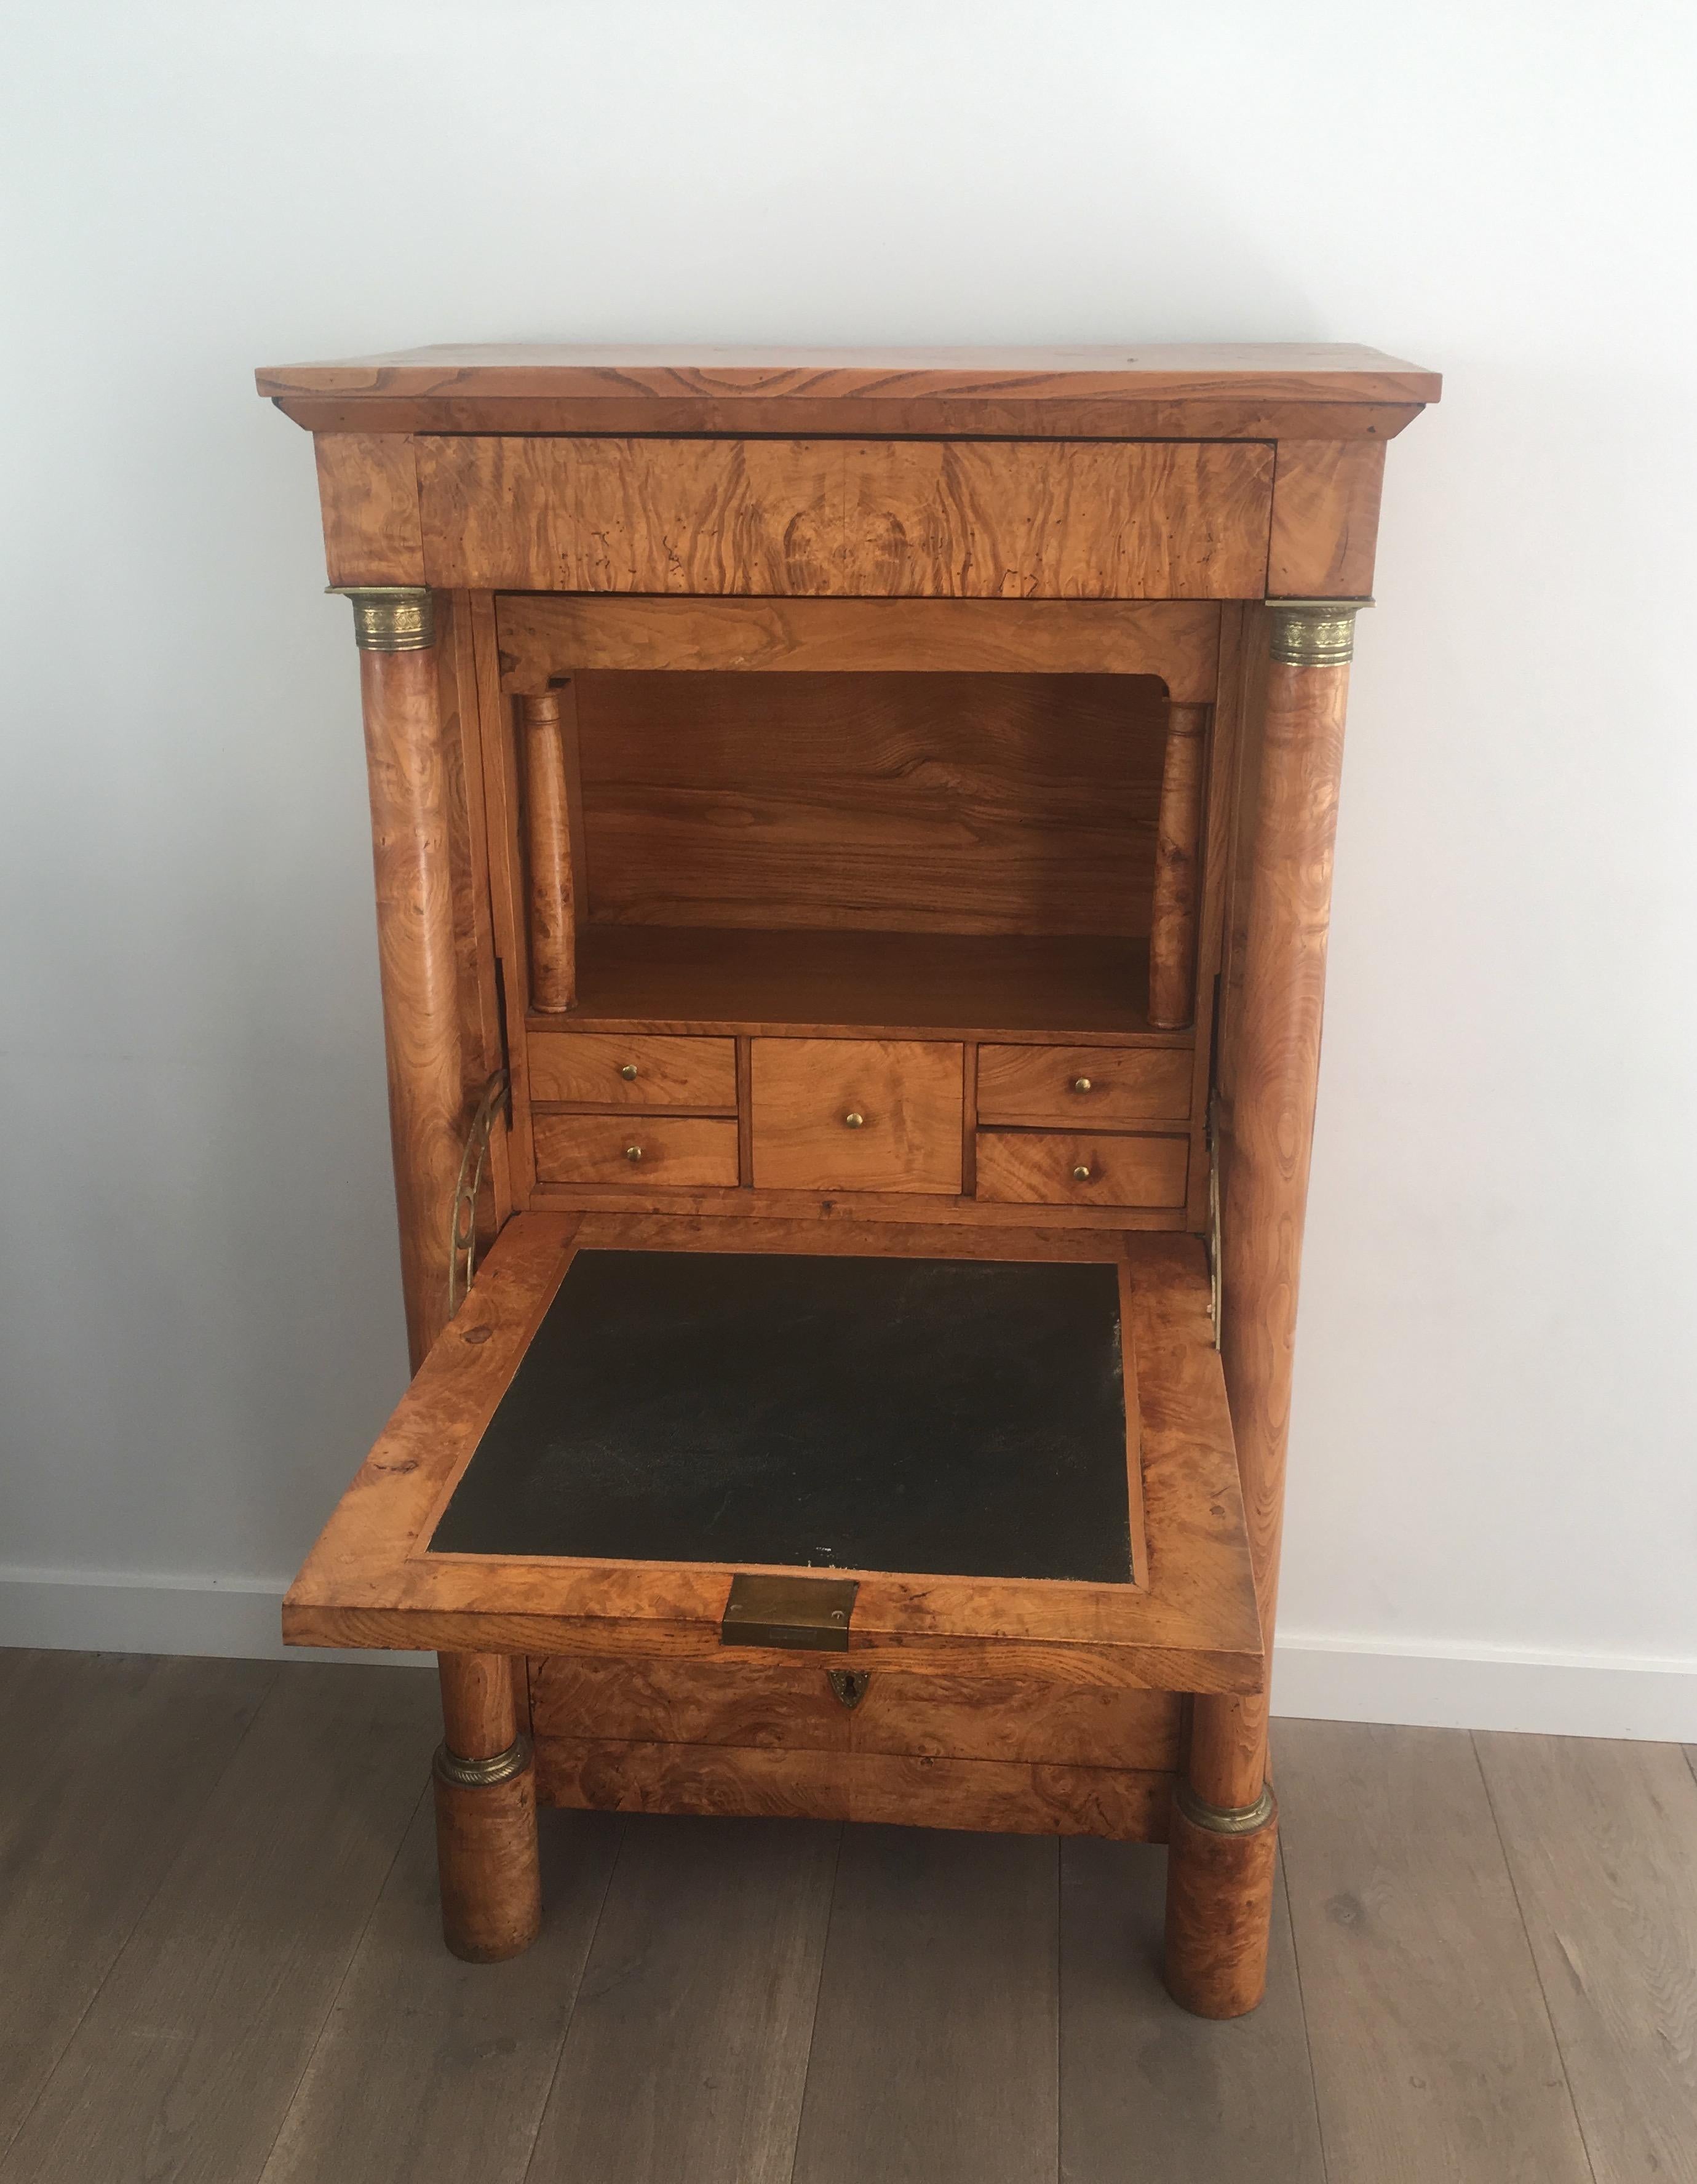 This beautiful Empire clapper secretaire is made of burr walnut. It has very elegant detached columns with Fine chiseled bronze elements on top and bottom of each column. Inside of the secretaire there is leather desk and several drawers including a